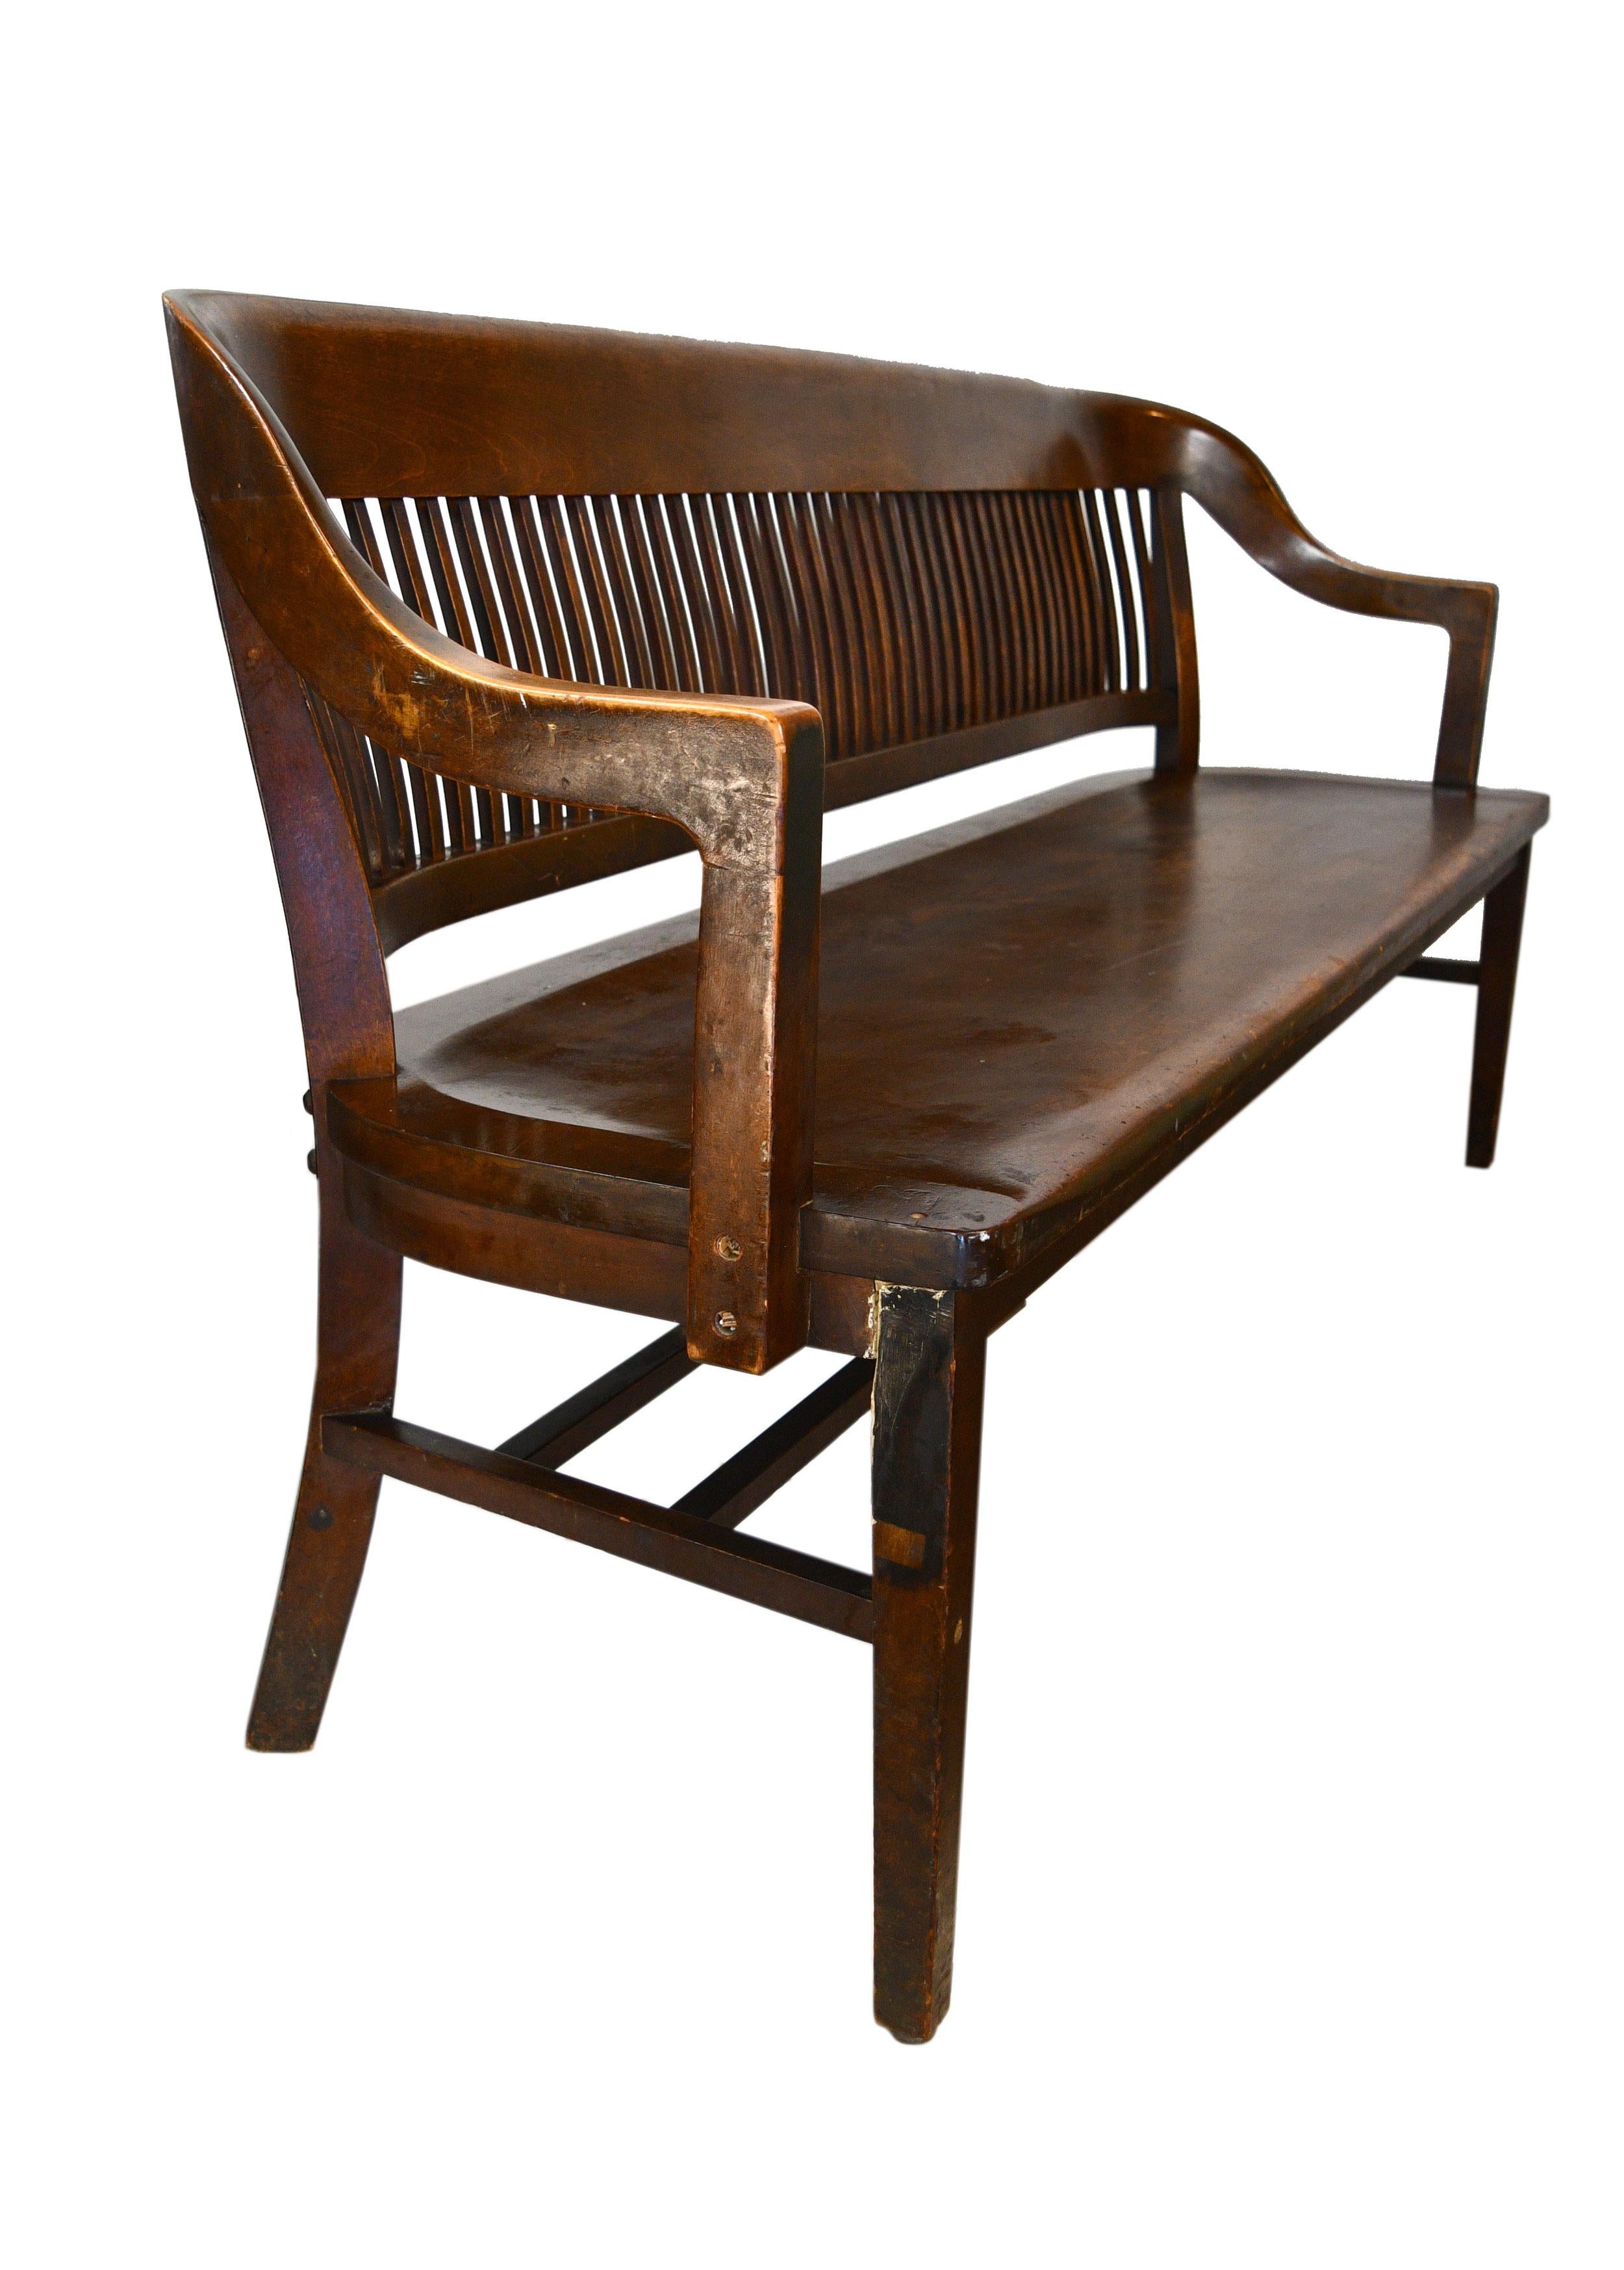 This handsomely crafted W.H. Gunlocke Chair Co. curved back courtroom bench would bring stately character to any space!